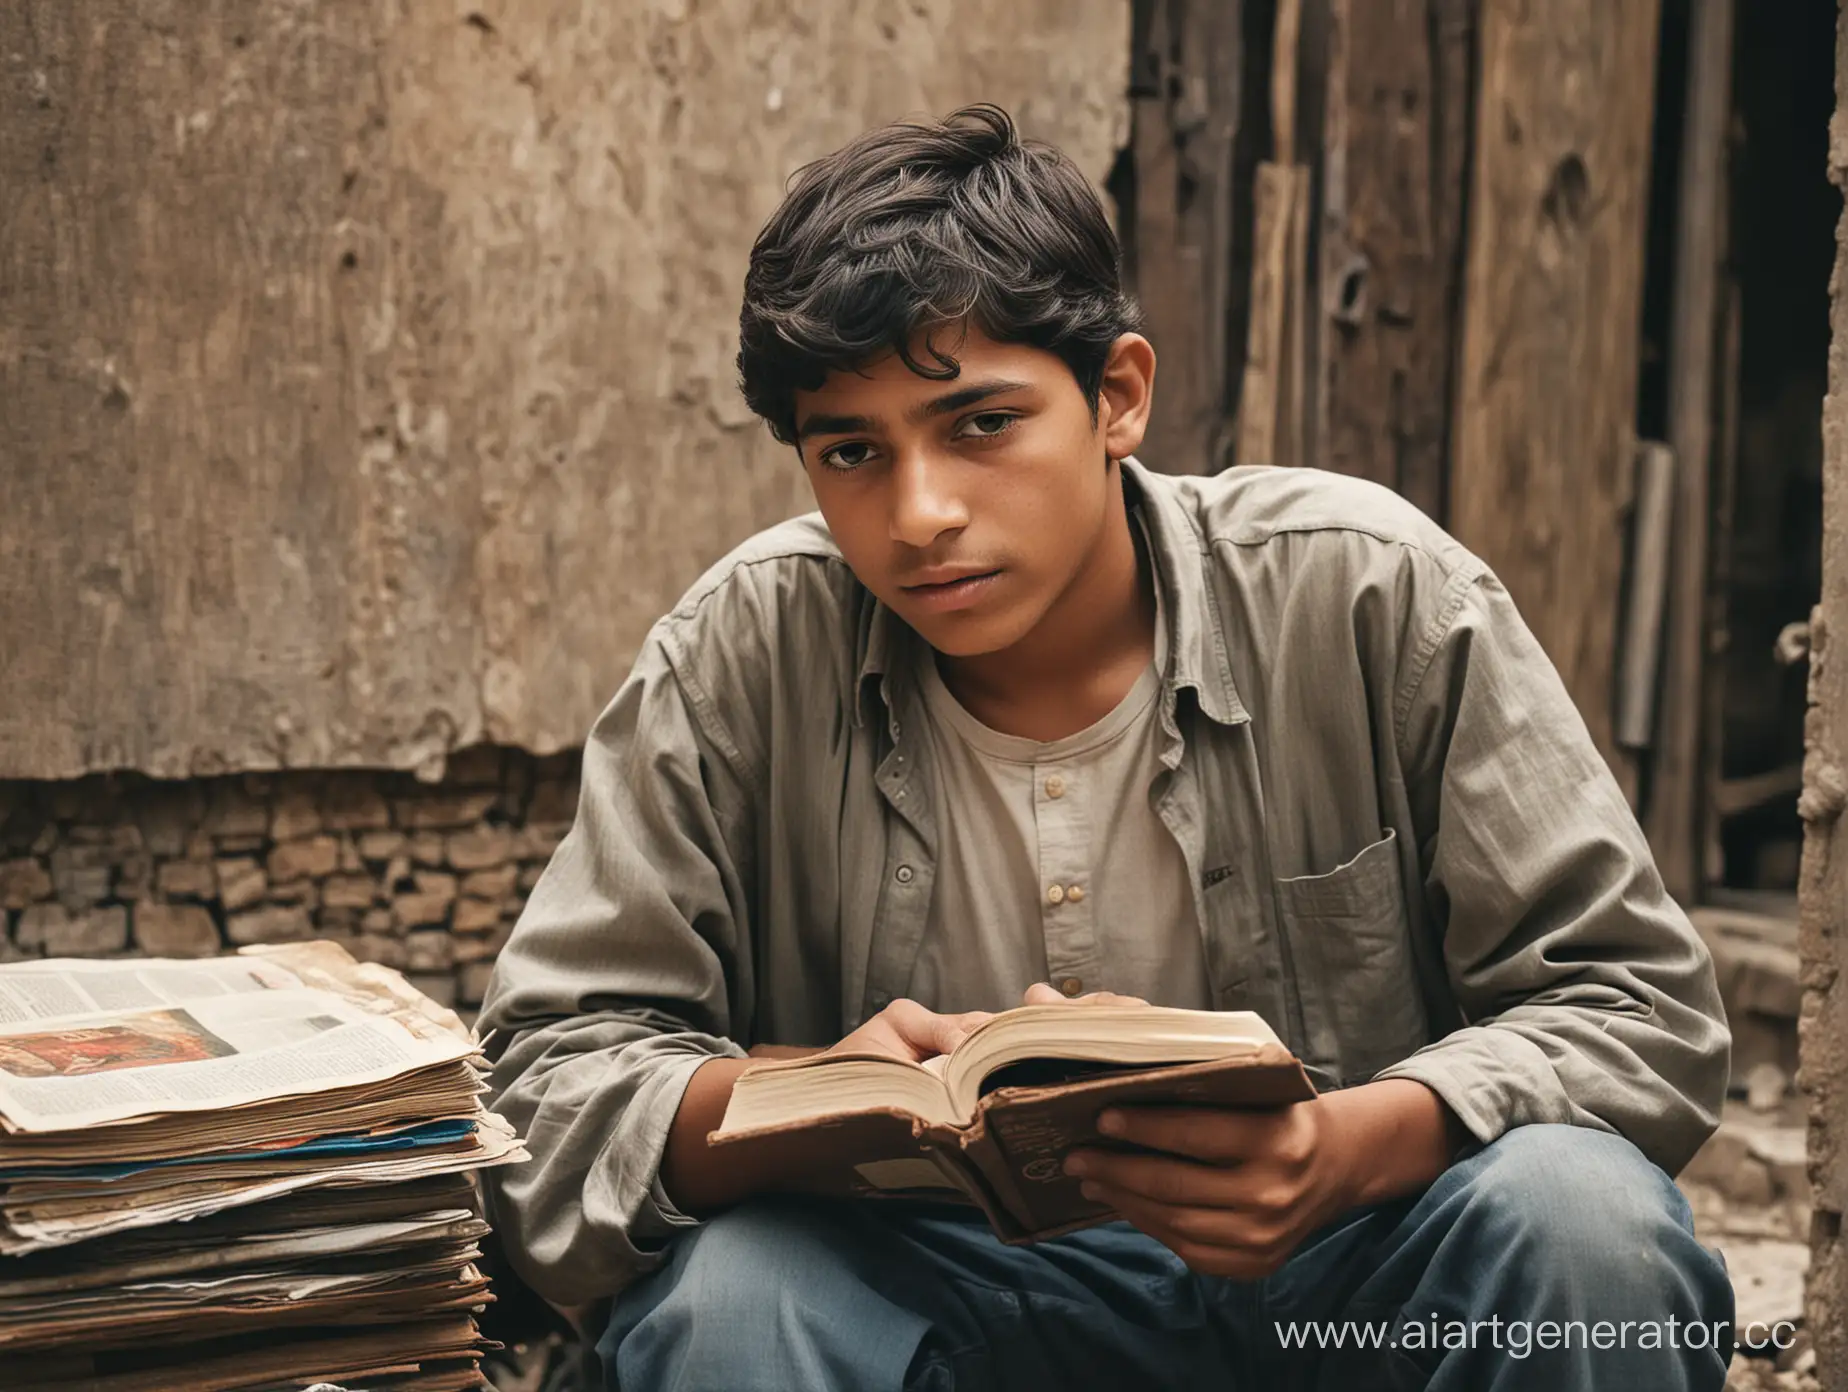 Inspired-Teenage-Boy-Contemplating-Equality-after-Reading-Capital-Barsa